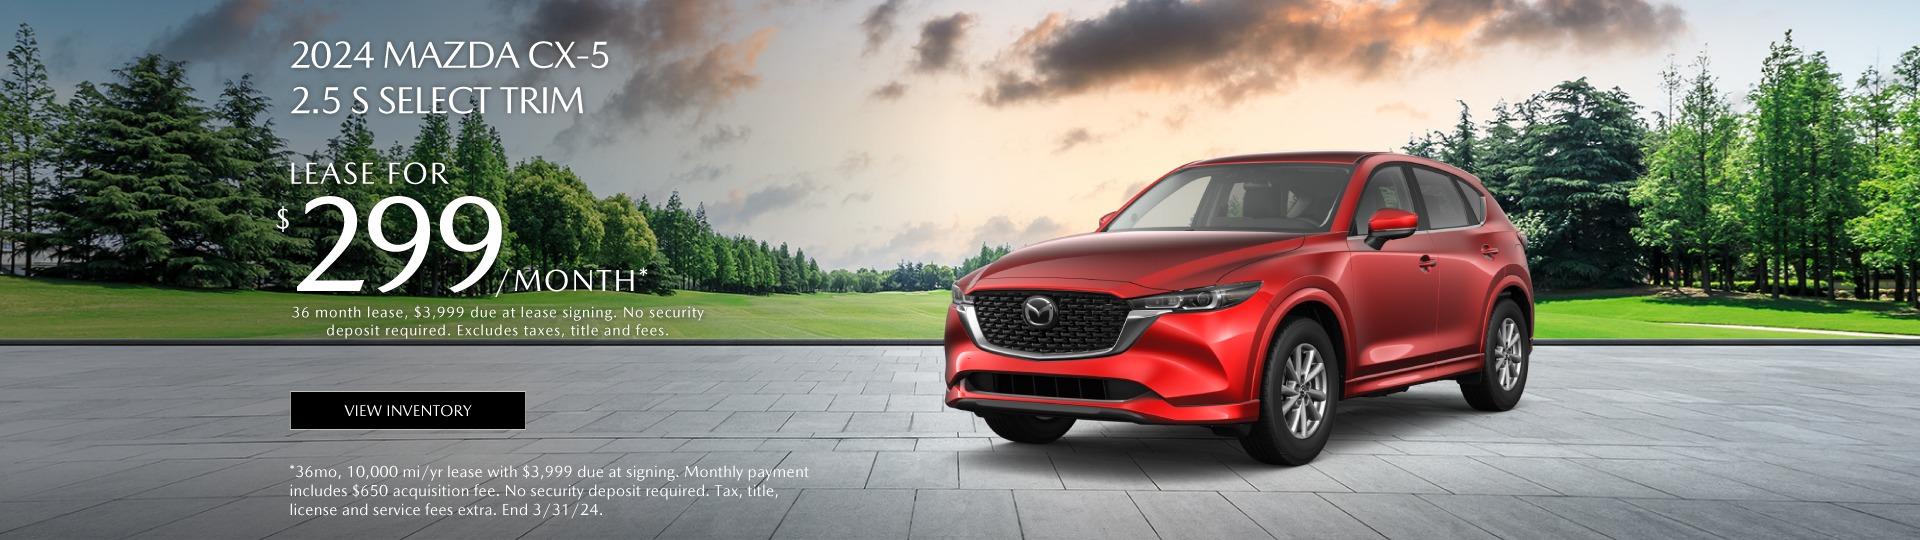 2024 Mazda CX-5 lease for $299 per month for 36 months